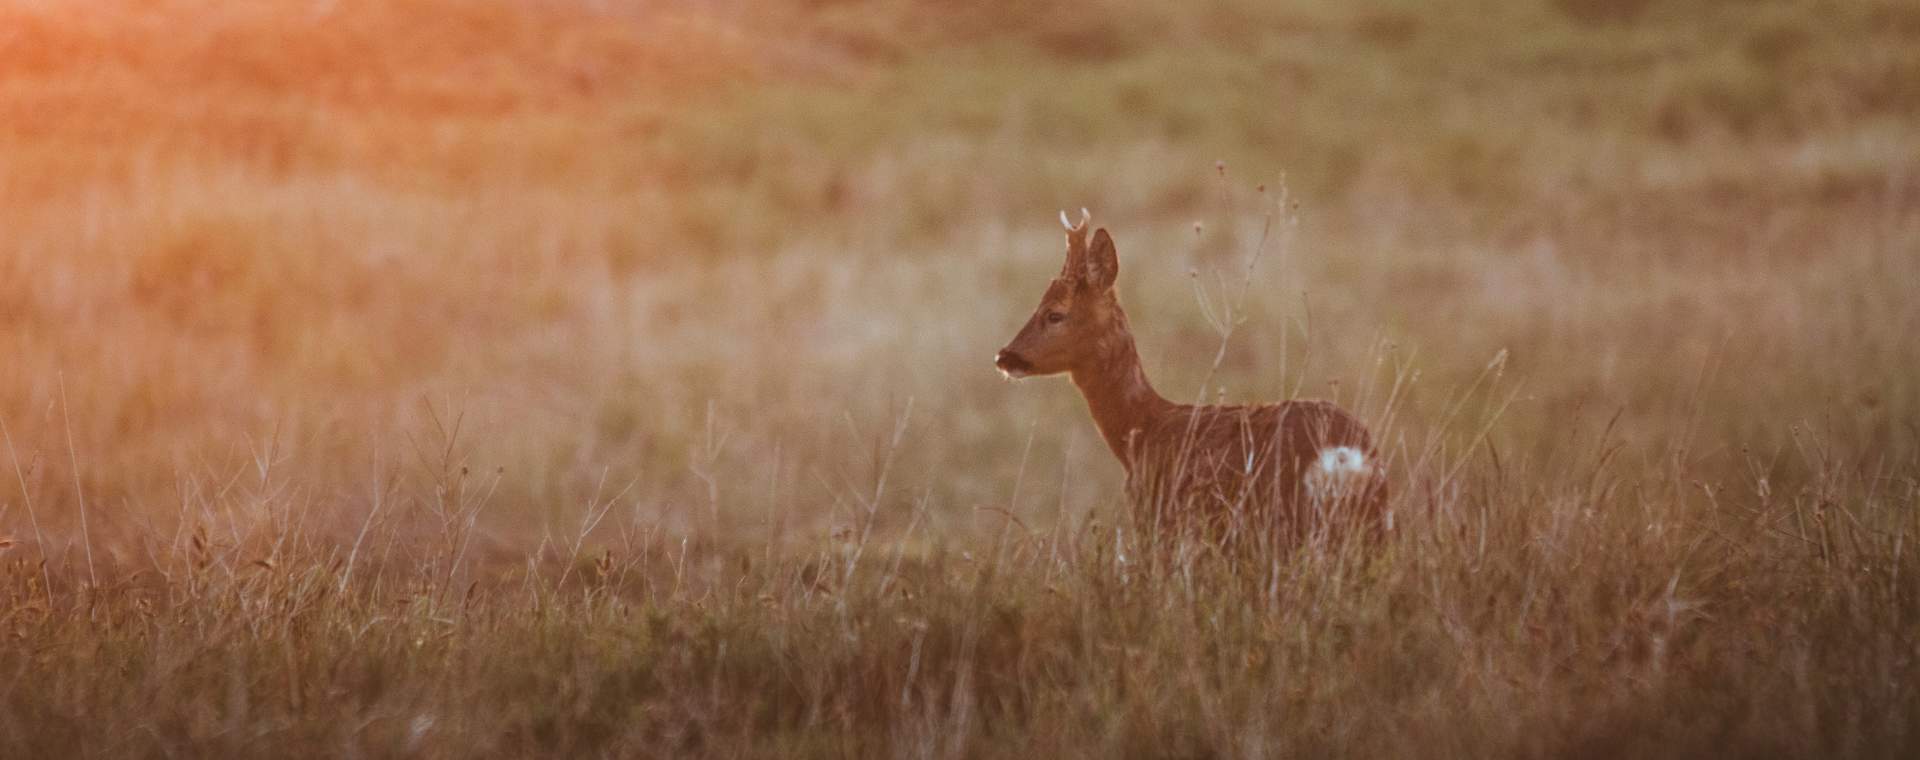 A young deer in the long grasses of the Yorkshire Wolds in East Yorkshire